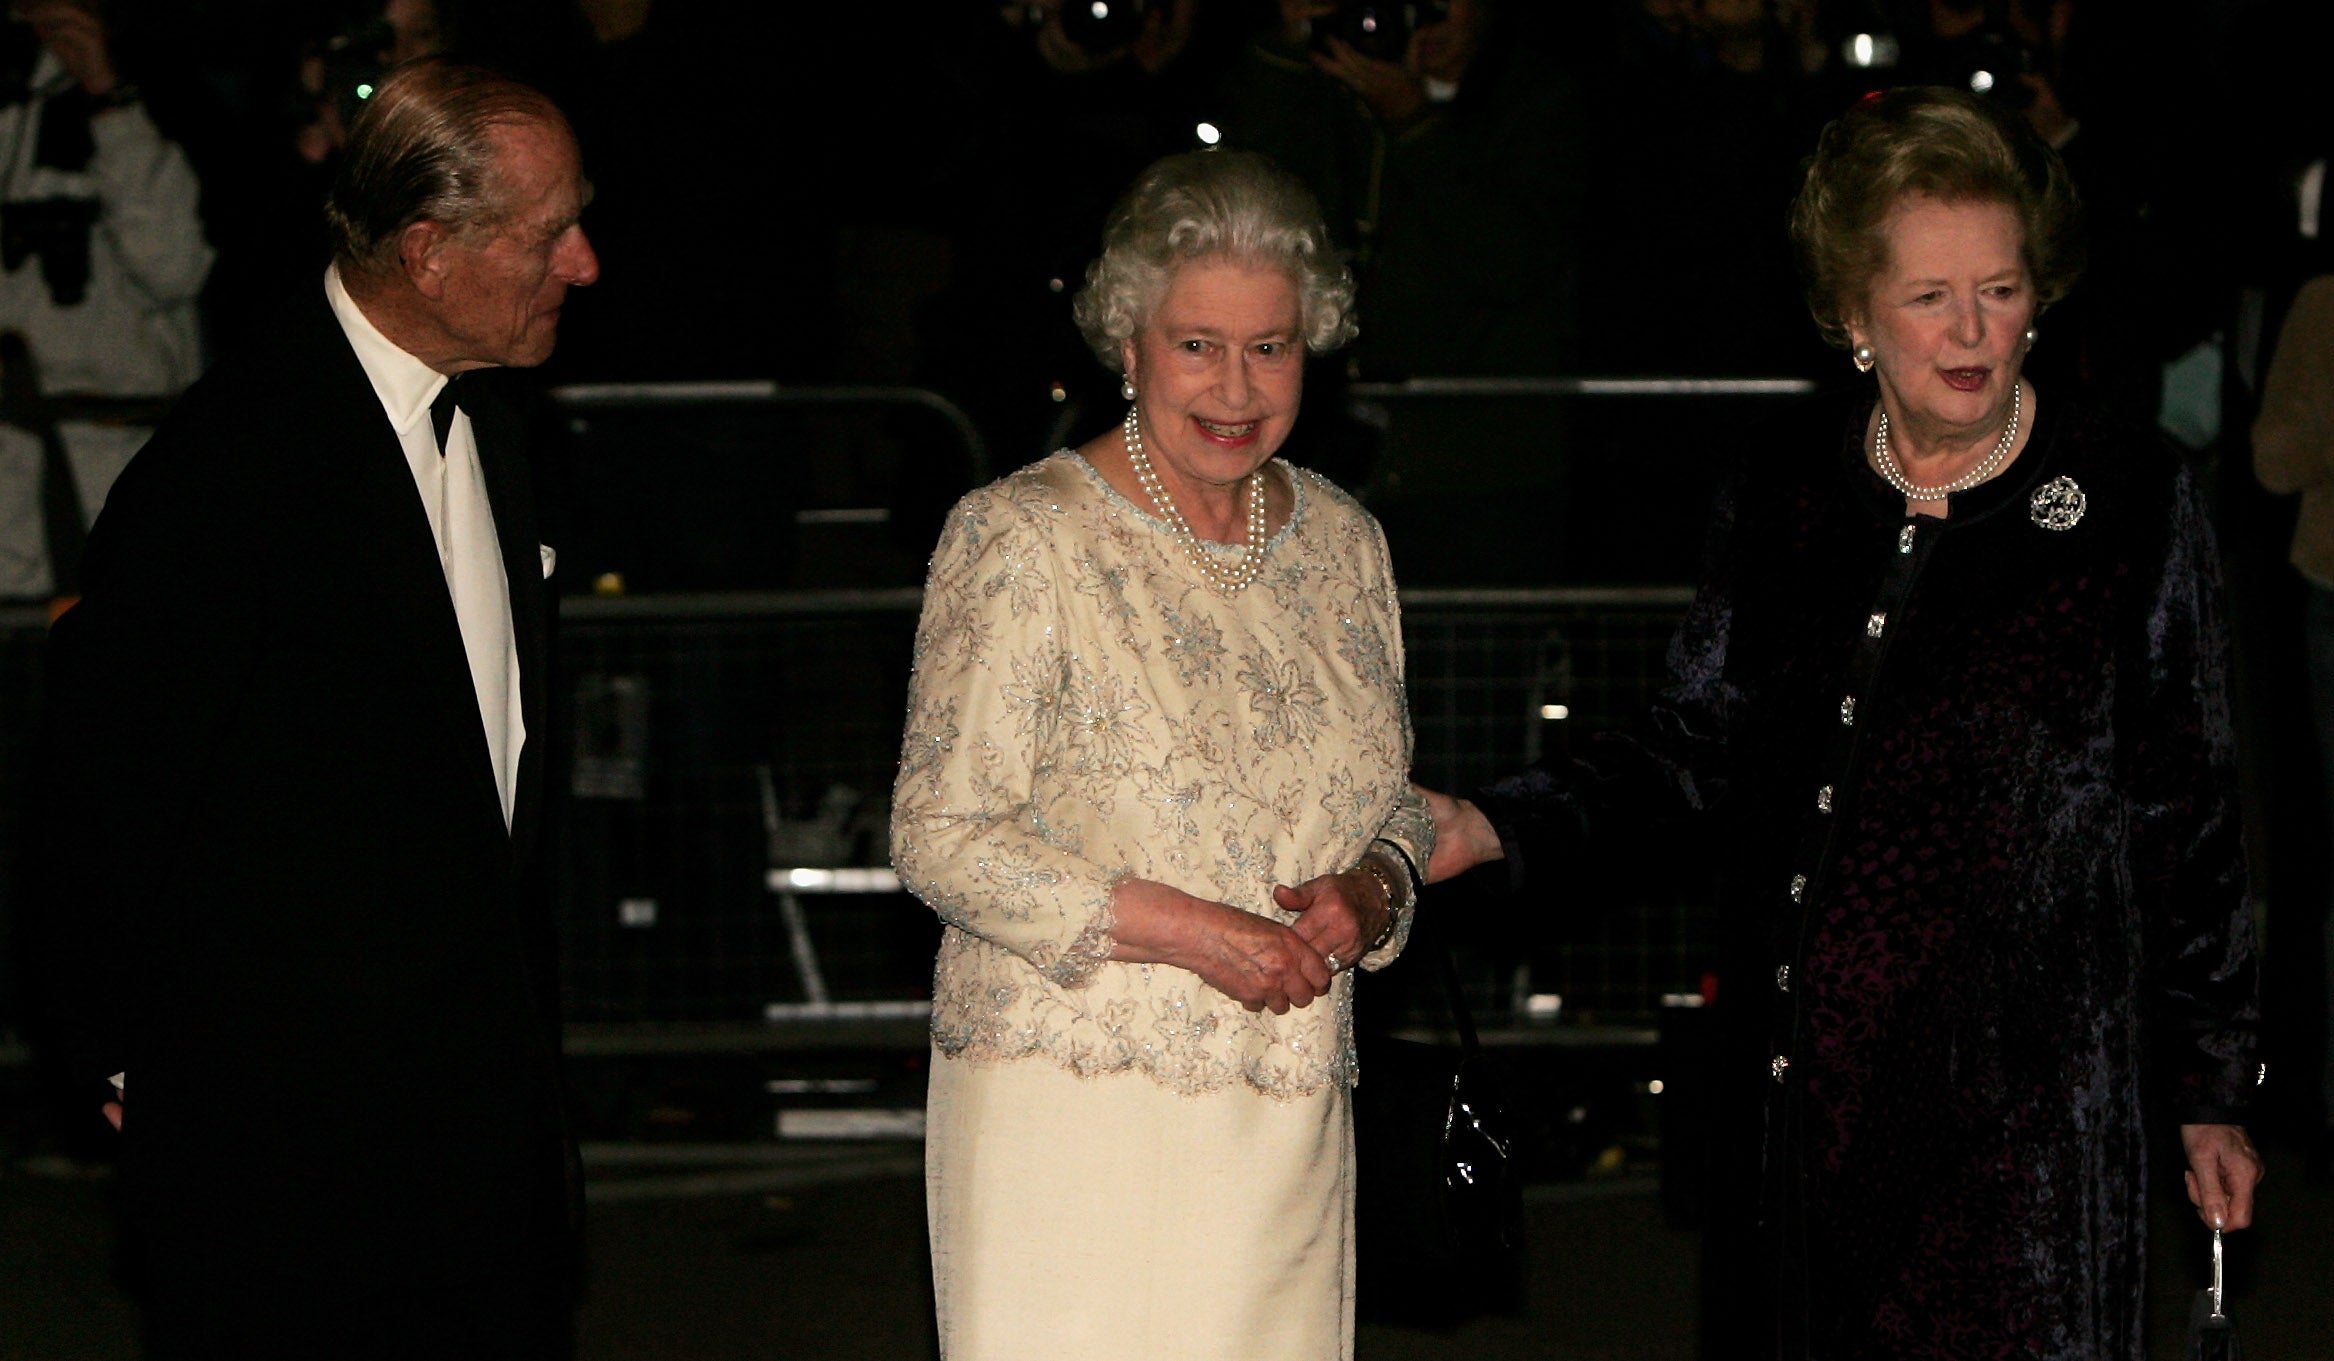 Former British Prime Minister Baroness Margaret Thatcher (R) greets HM Queen Elizabeth II and Prince Philip, Duke of Edinburgh, as they arrive for Thatcher's 80th birthday party at the Mandarin Oriental on October 13, 2005